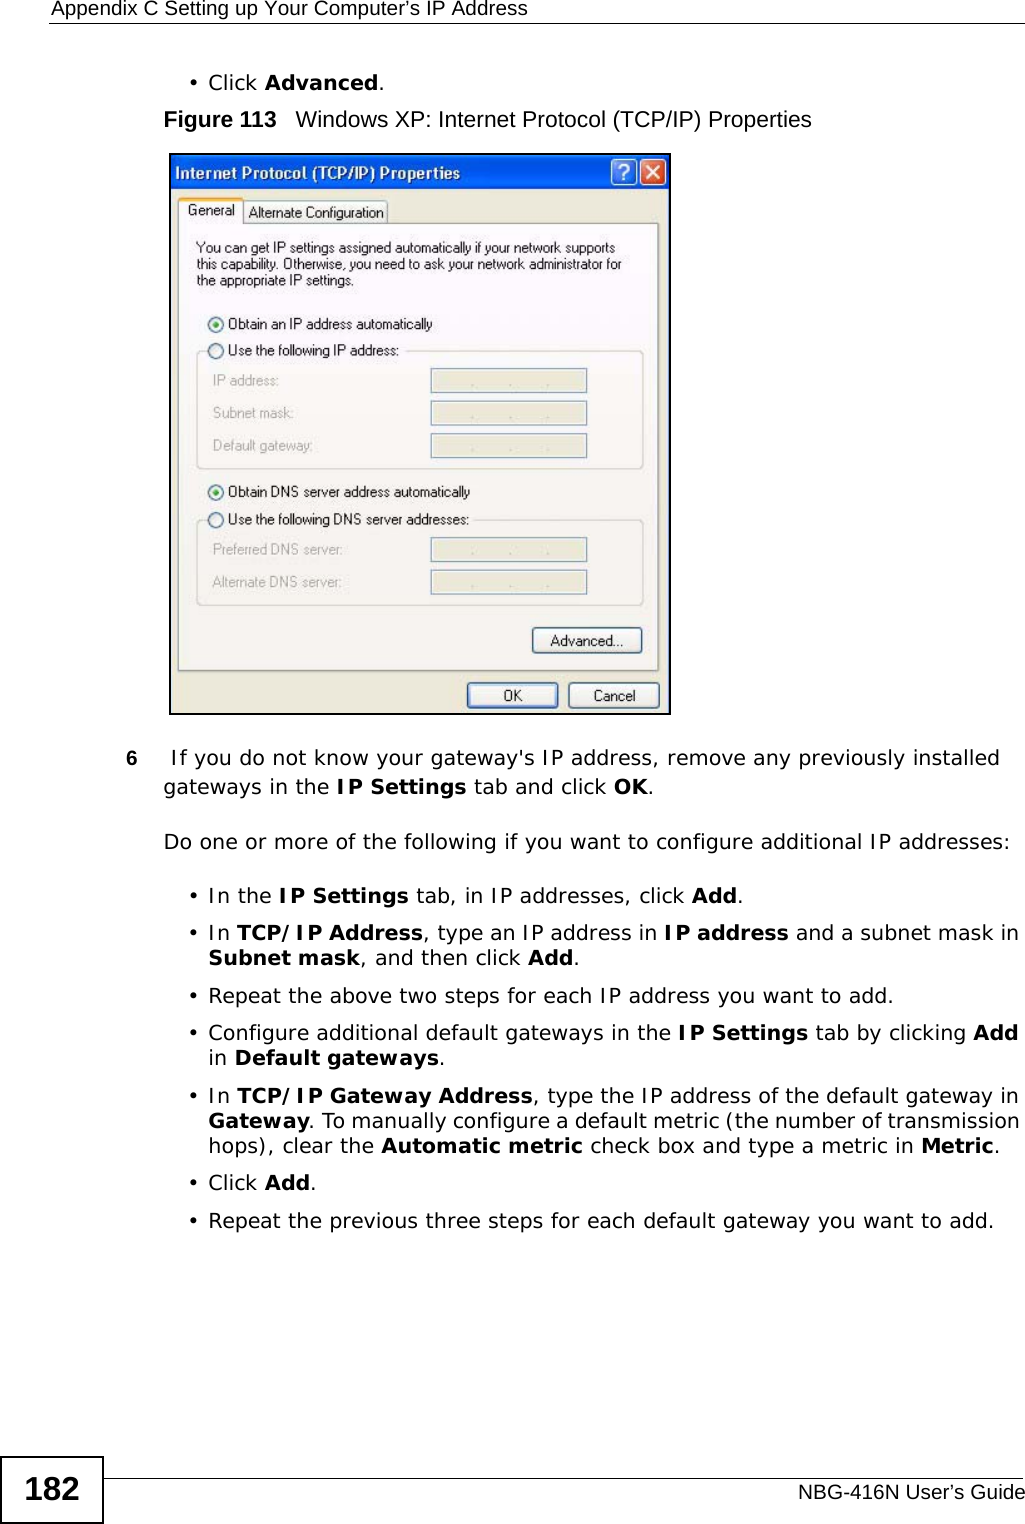 Appendix C Setting up Your Computer’s IP AddressNBG-416N User’s Guide182•Click Advanced.Figure 113   Windows XP: Internet Protocol (TCP/IP) Properties6 If you do not know your gateway&apos;s IP address, remove any previously installed gateways in the IP Settings tab and click OK.Do one or more of the following if you want to configure additional IP addresses:•In the IP Settings tab, in IP addresses, click Add.•In TCP/IP Address, type an IP address in IP address and a subnet mask in Subnet mask, and then click Add.• Repeat the above two steps for each IP address you want to add.• Configure additional default gateways in the IP Settings tab by clicking Add in Default gateways.•In TCP/IP Gateway Address, type the IP address of the default gateway in Gateway. To manually configure a default metric (the number of transmission hops), clear the Automatic metric check box and type a metric in Metric.•Click Add. • Repeat the previous three steps for each default gateway you want to add.